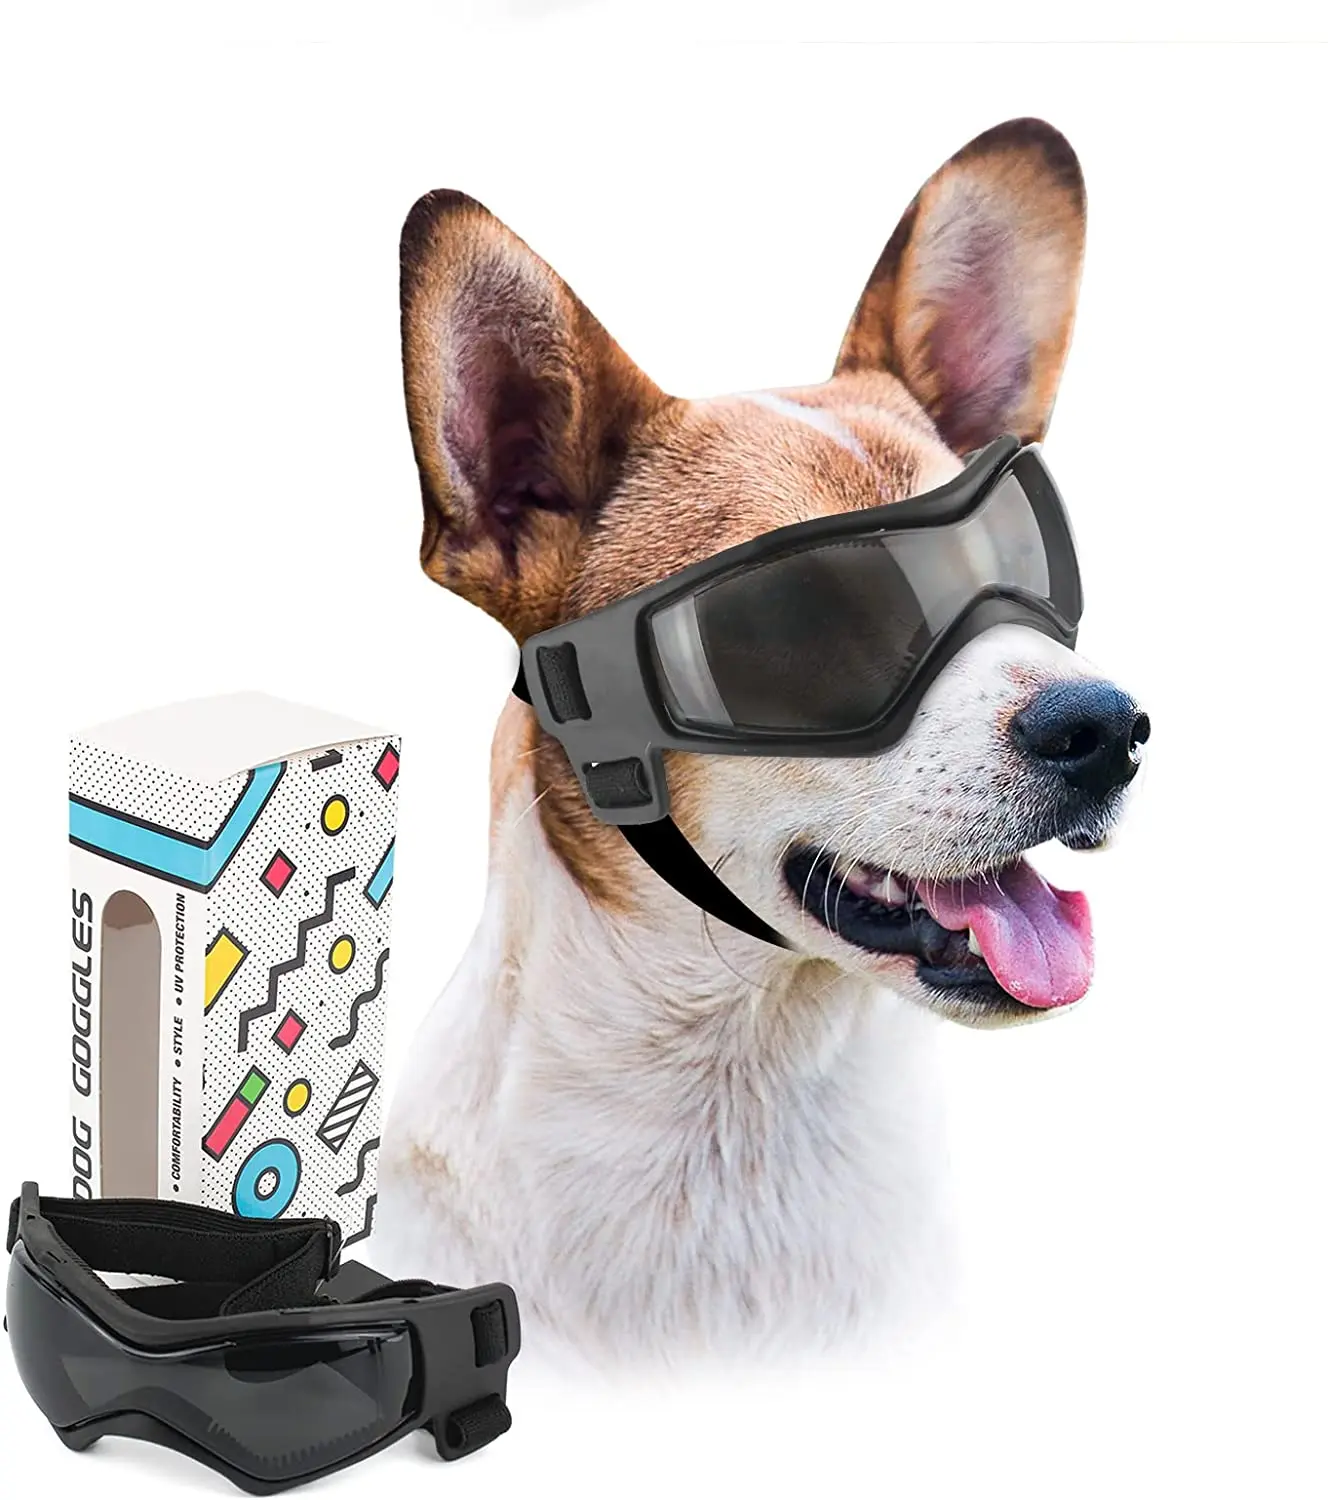 VIPet Dog Sunglasses/Snow Goggles with UV Protection for Dogs with A Glasses Bag 